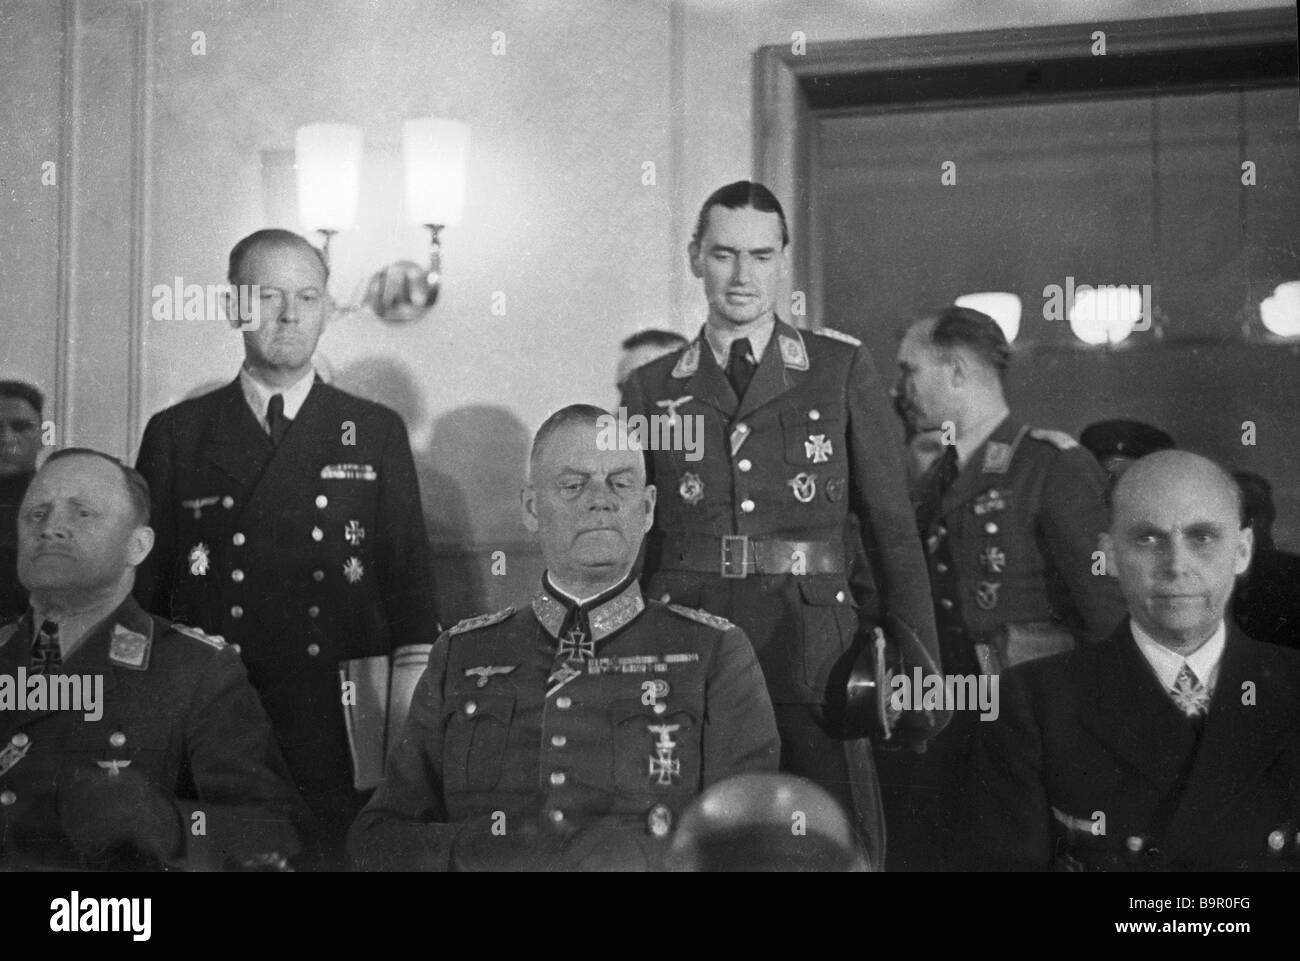 Nazi commanders headed by General Field Marshal Keitel signing the act ...